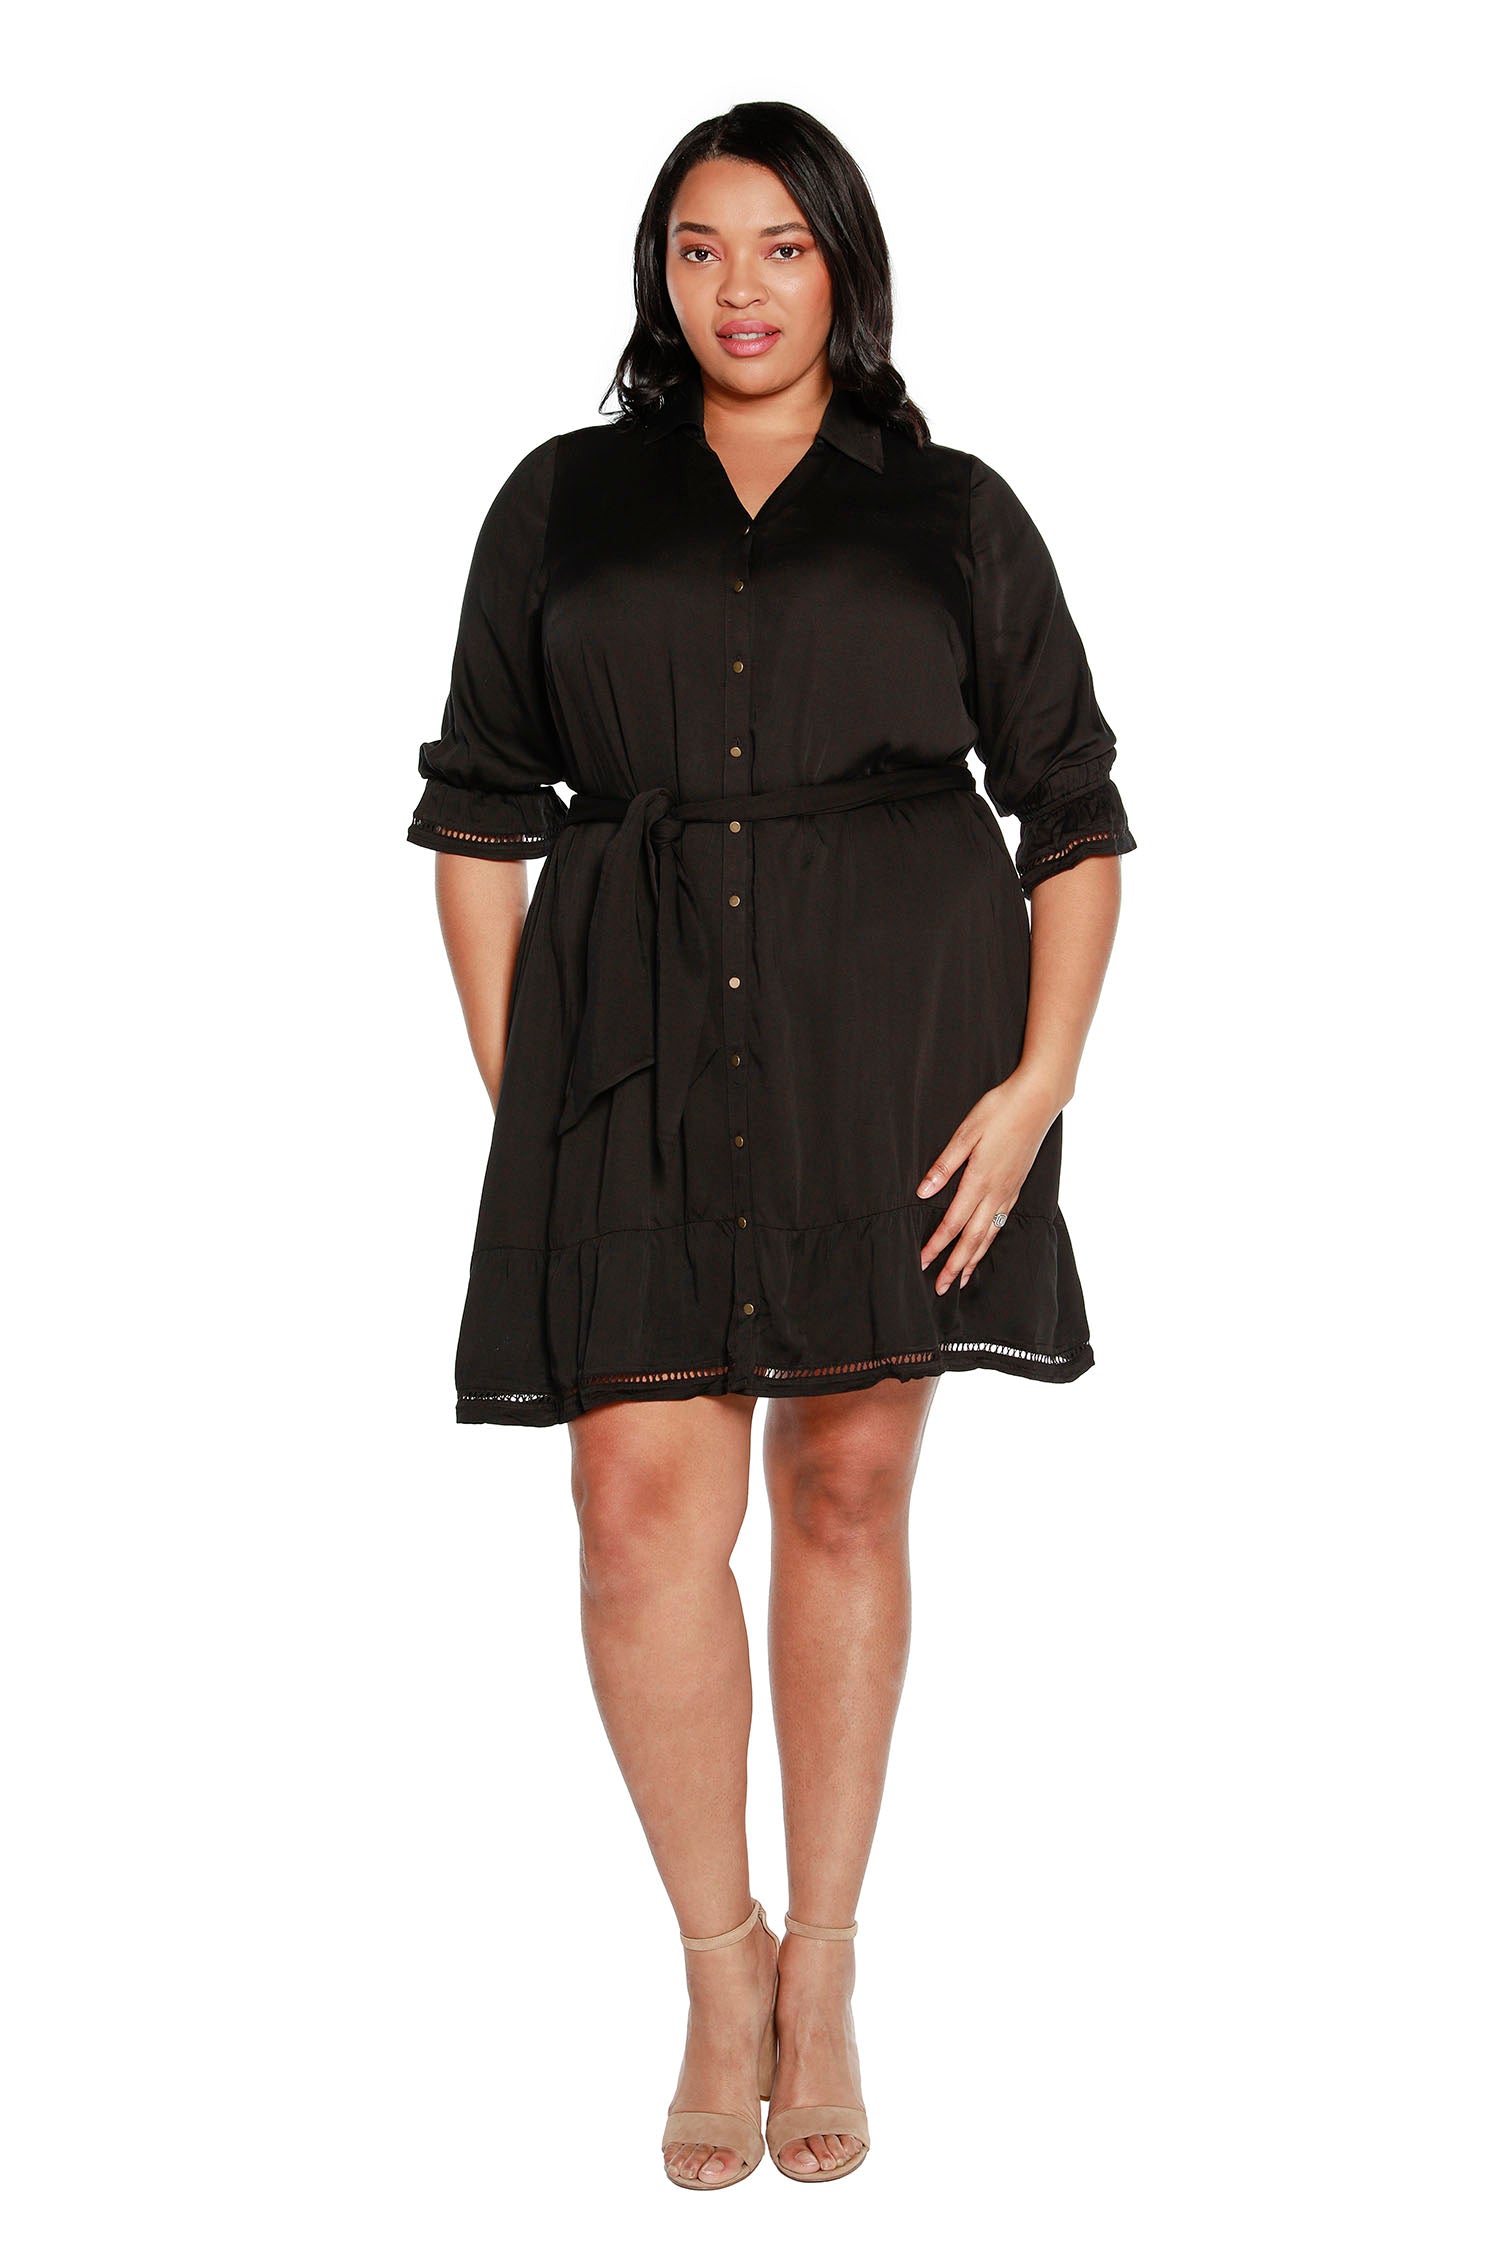 Women's Silky Rayon Button-Up Shirtdress with Ruffled Sleeves | Curvy